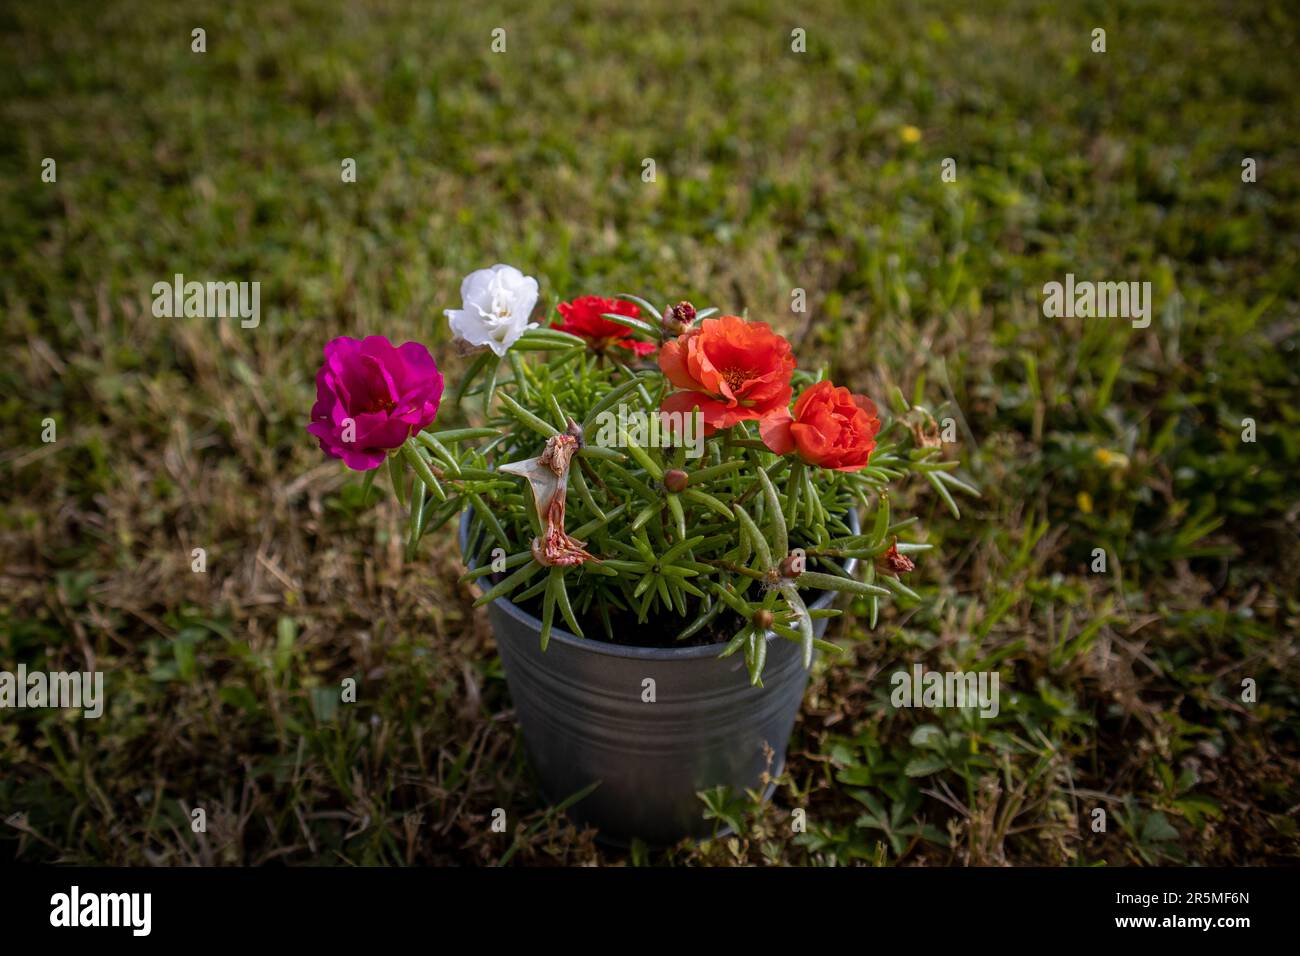 Moss rose in the grass Stock Photo